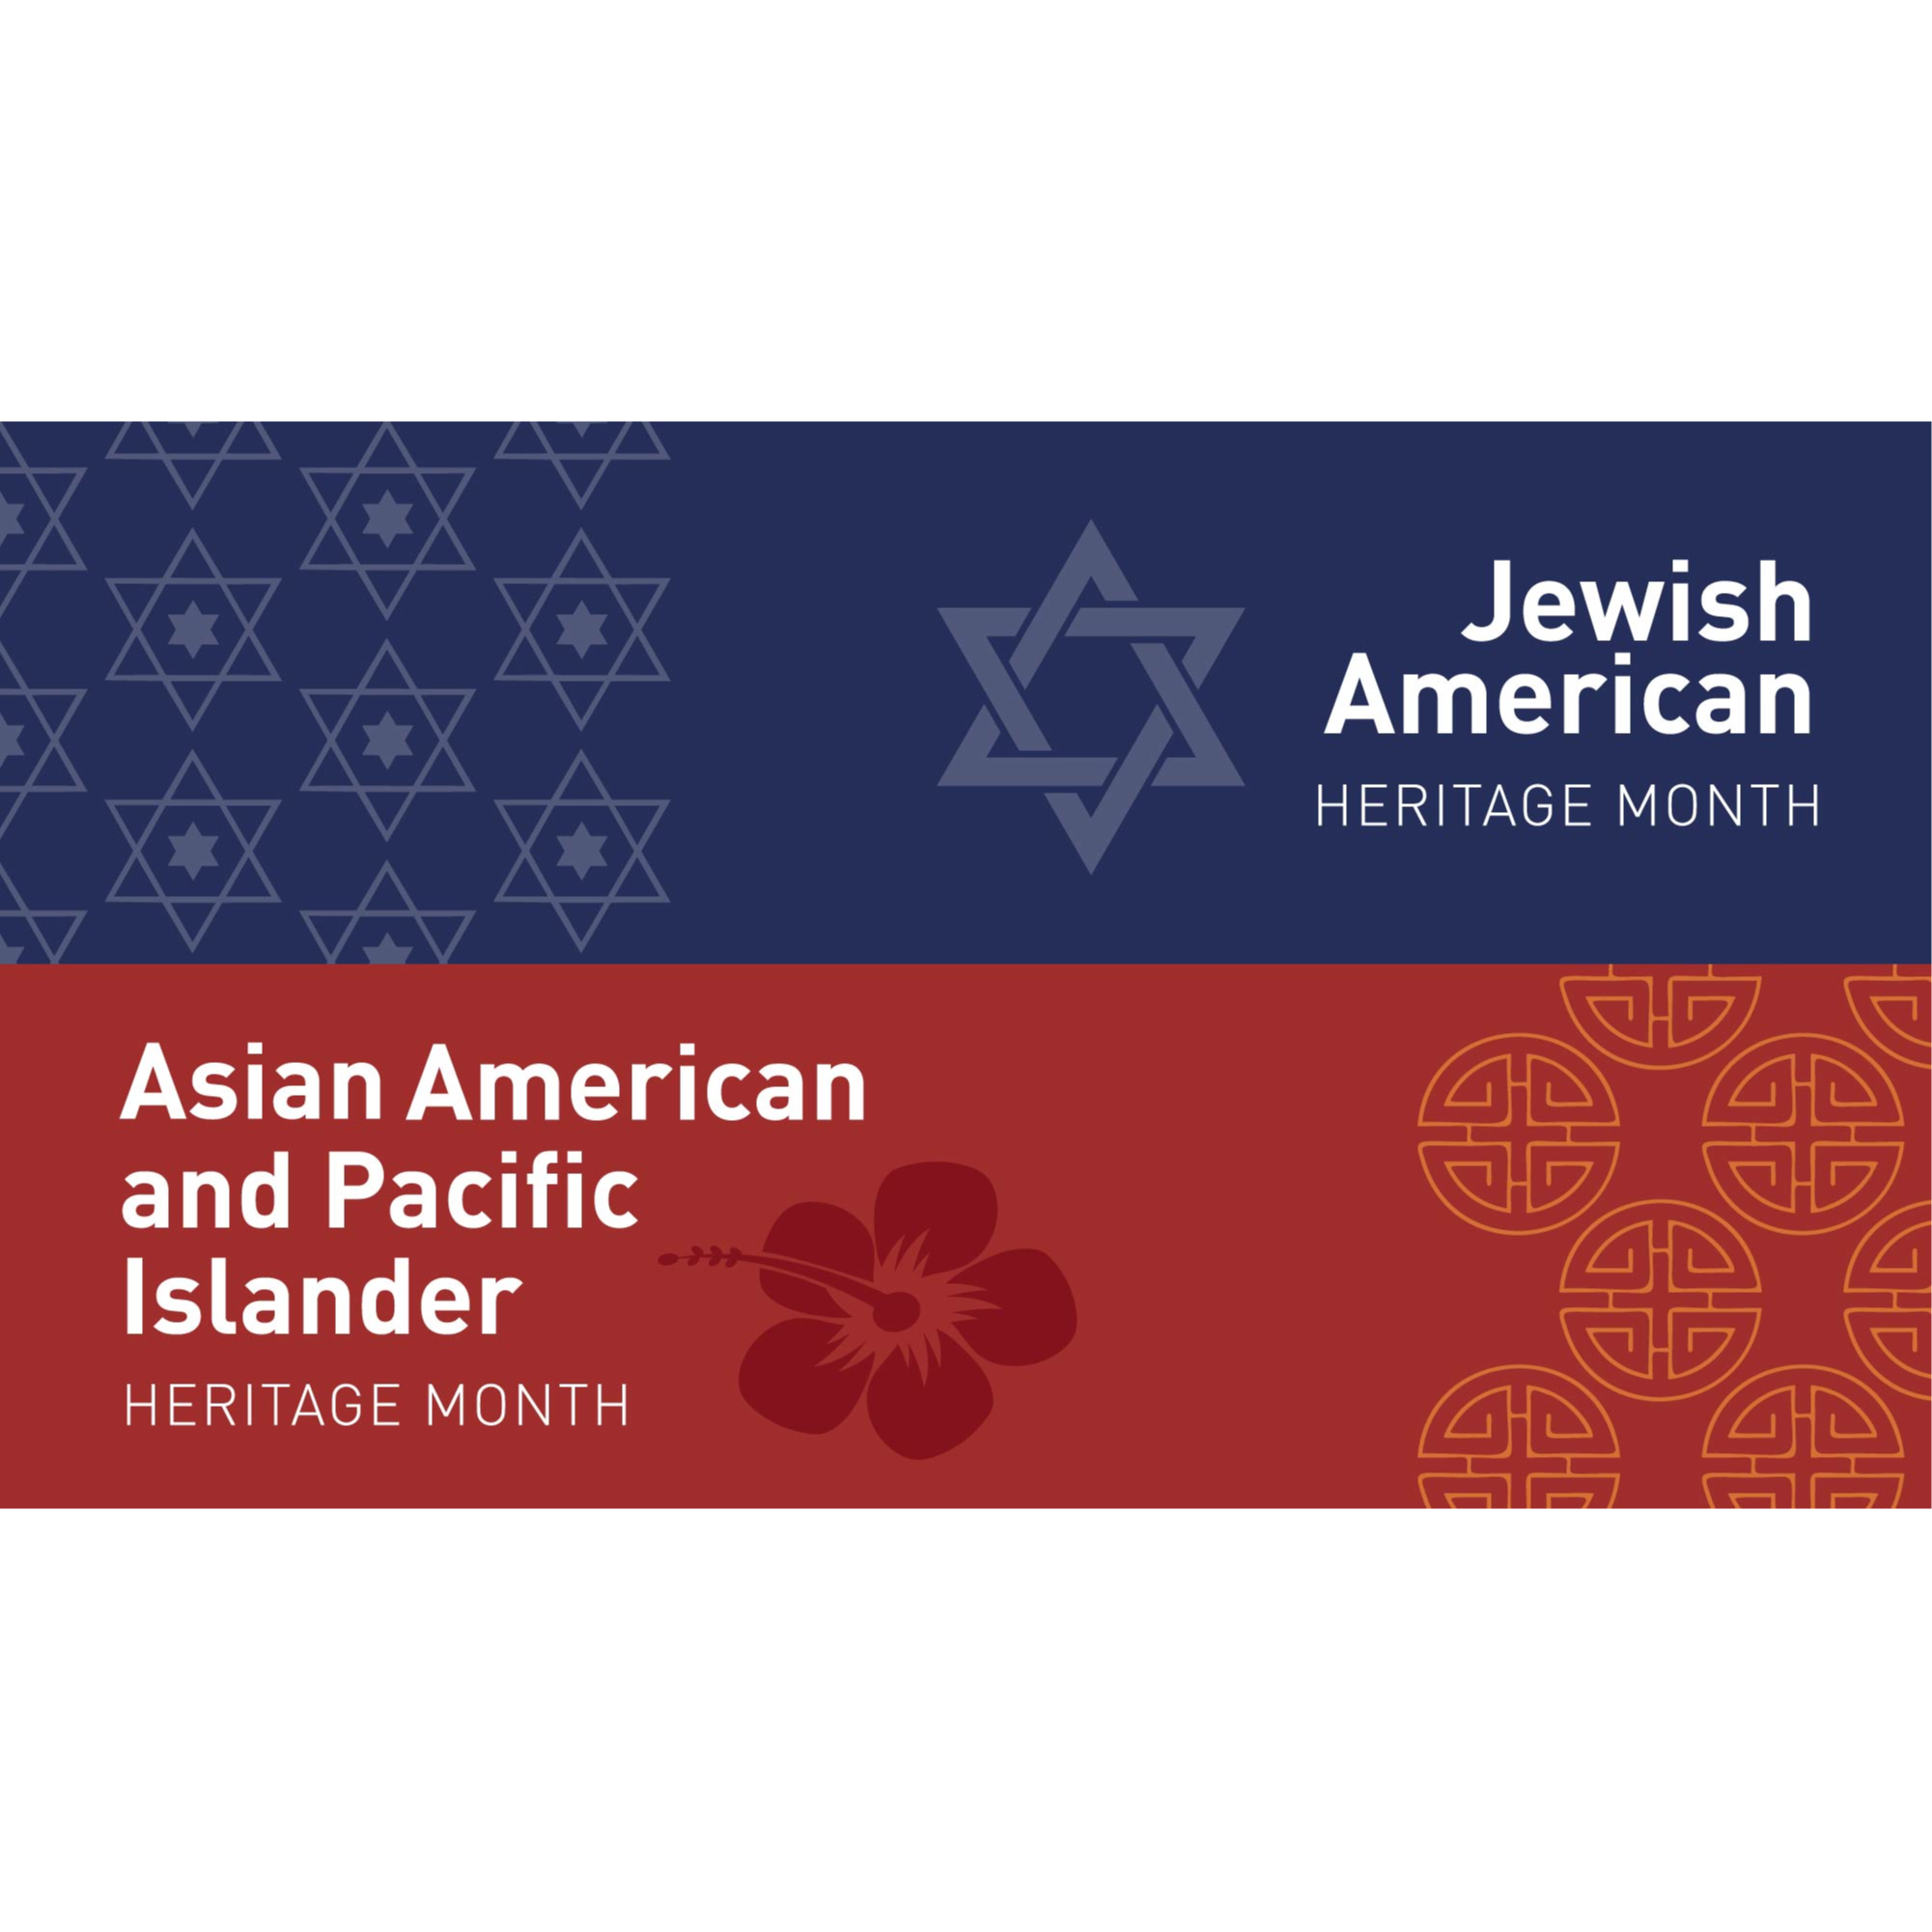 Jewish American Heritage Month and Asian American and Pacific Islander Heritage Month